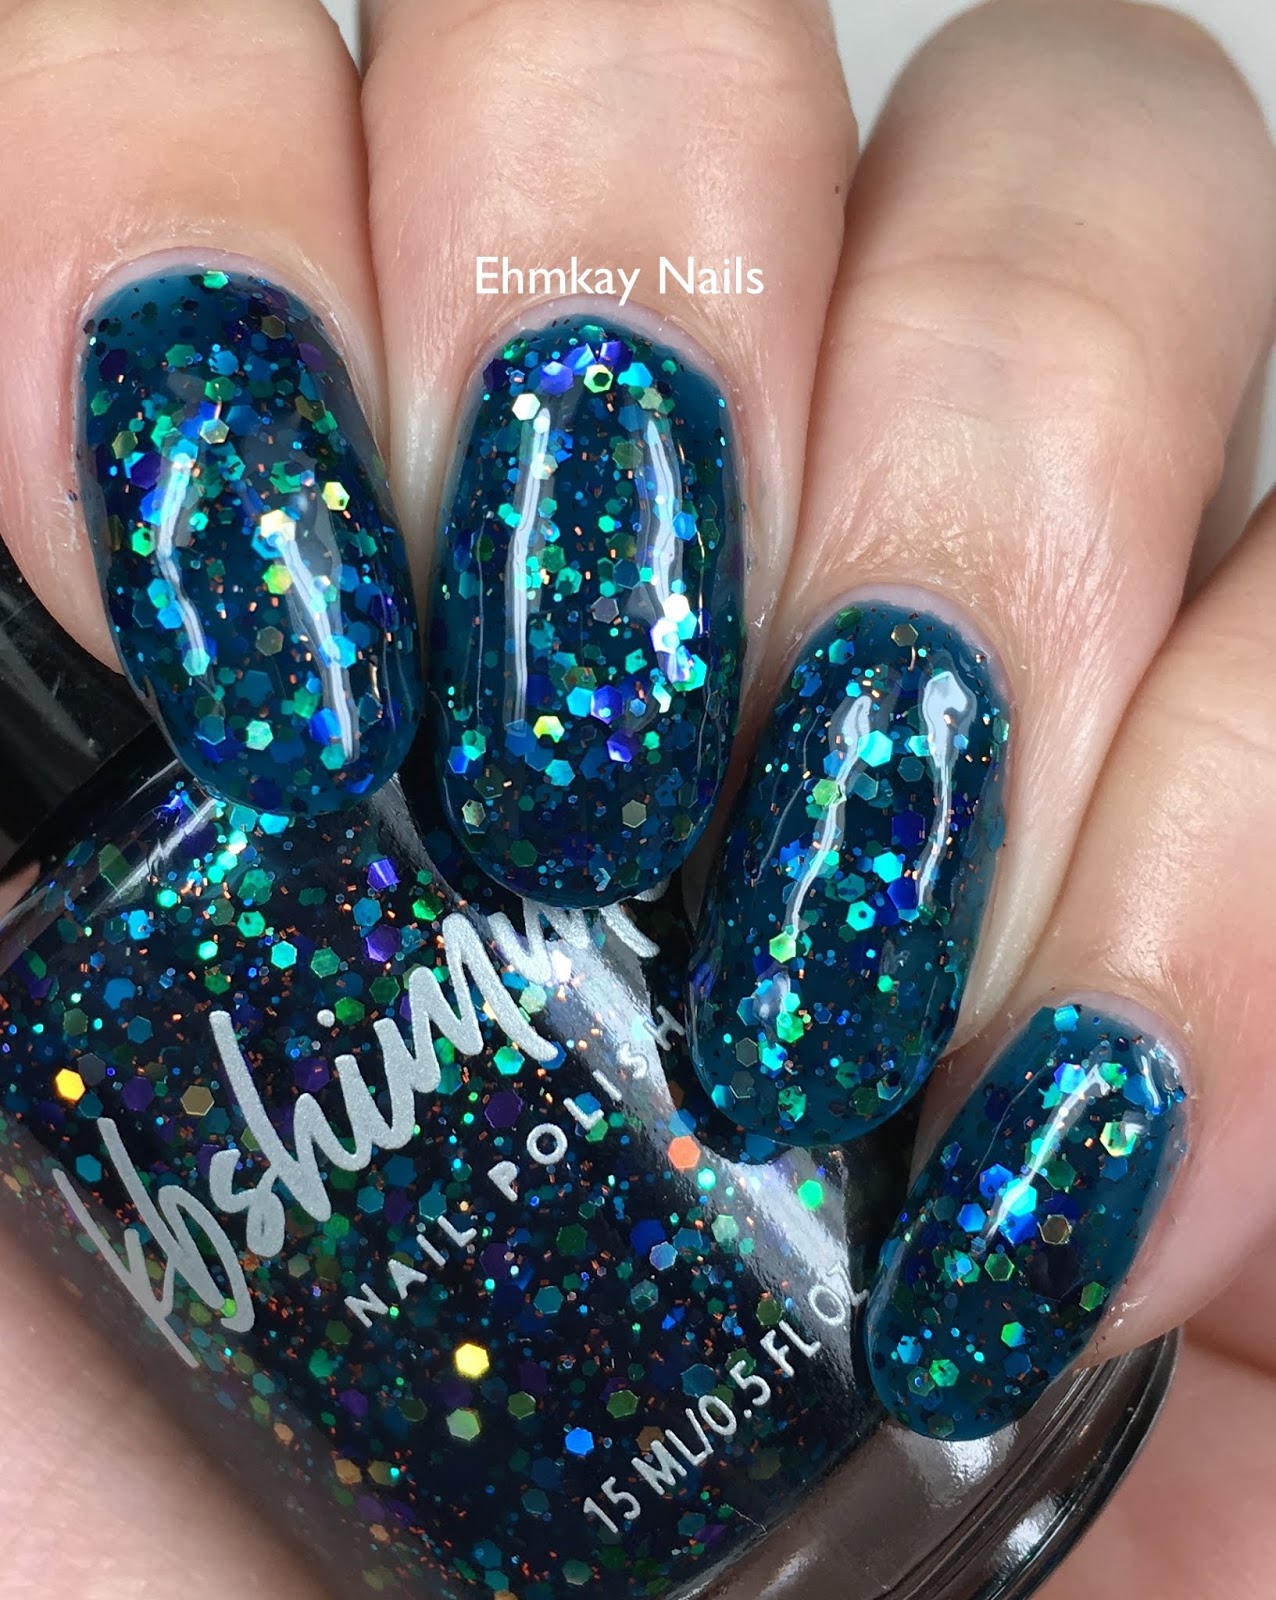 KBShimmer Witch Way Jelly Glitter Nail Polish